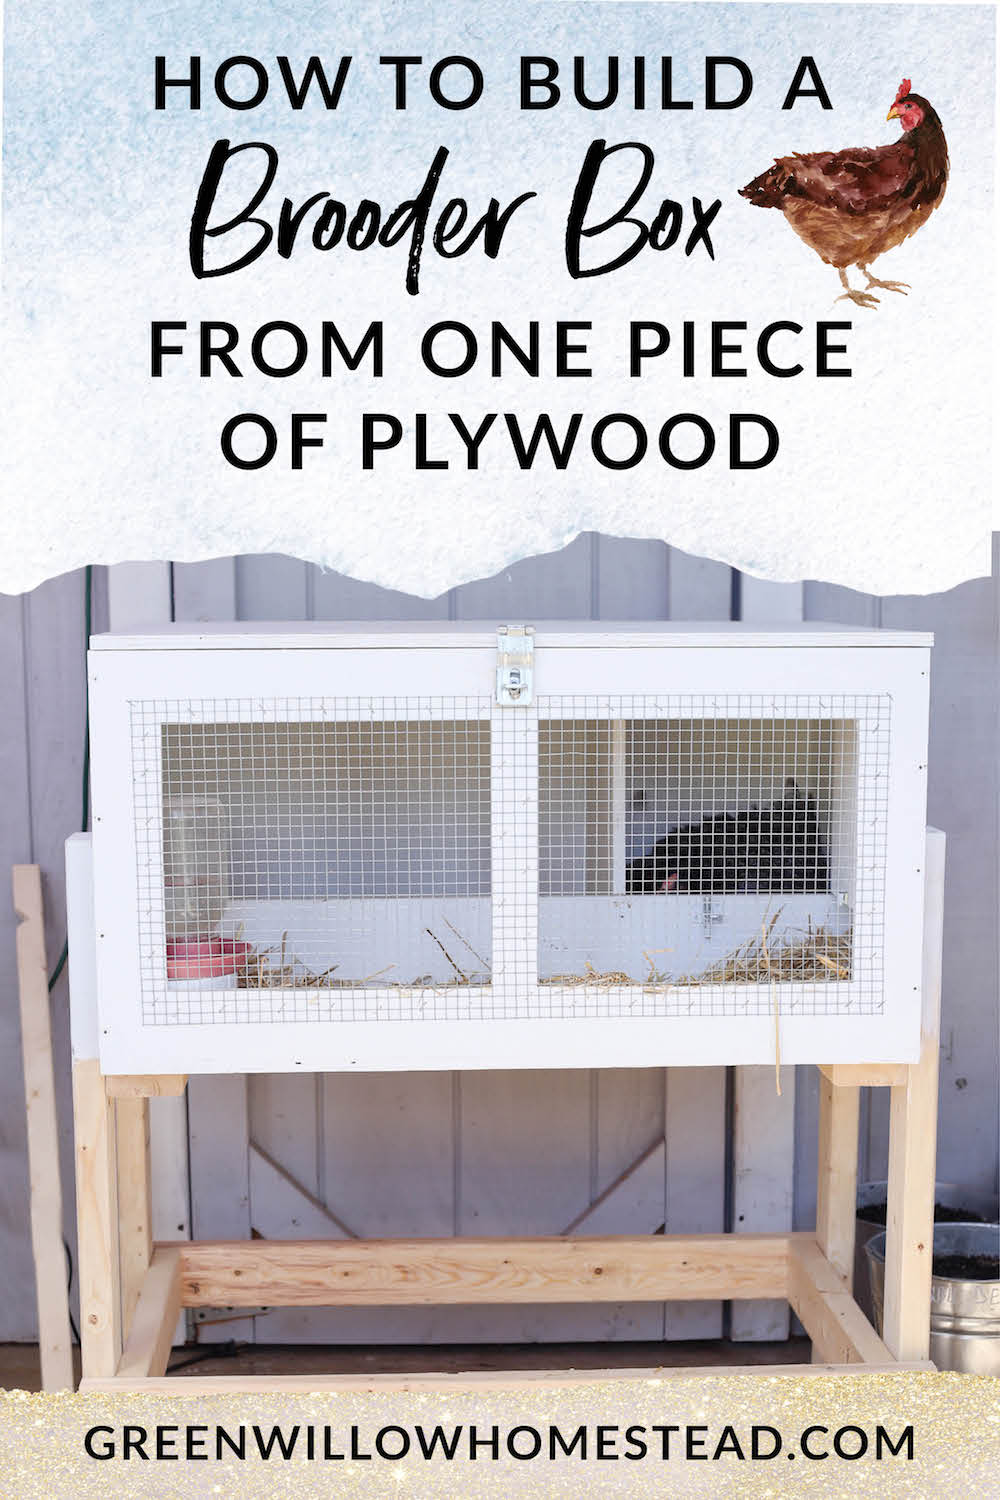 How to build a Brooder Box from one piece of plywood